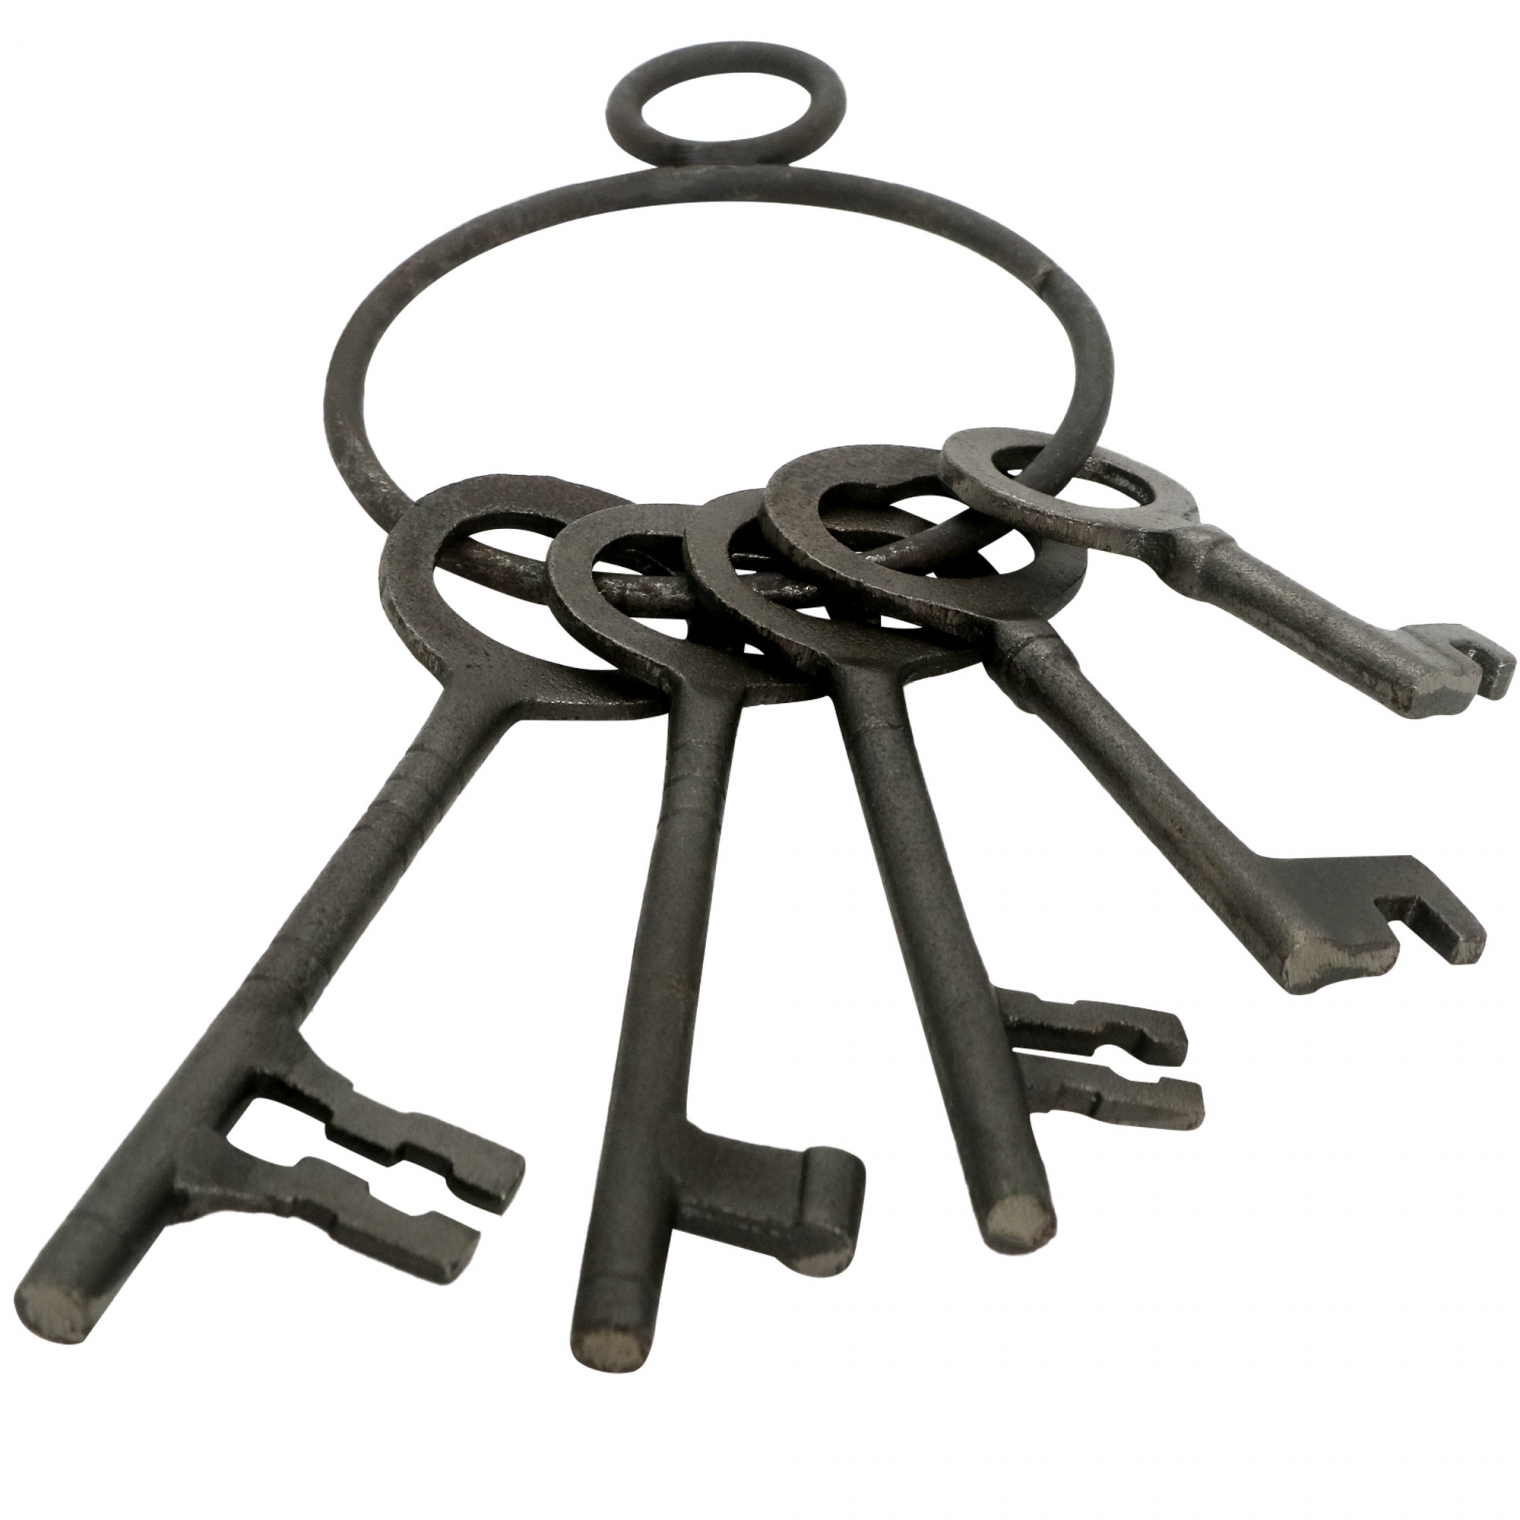 Medieval Dungeon Decorative Key Set of 5 Hand Forged Iron - Medieval ...